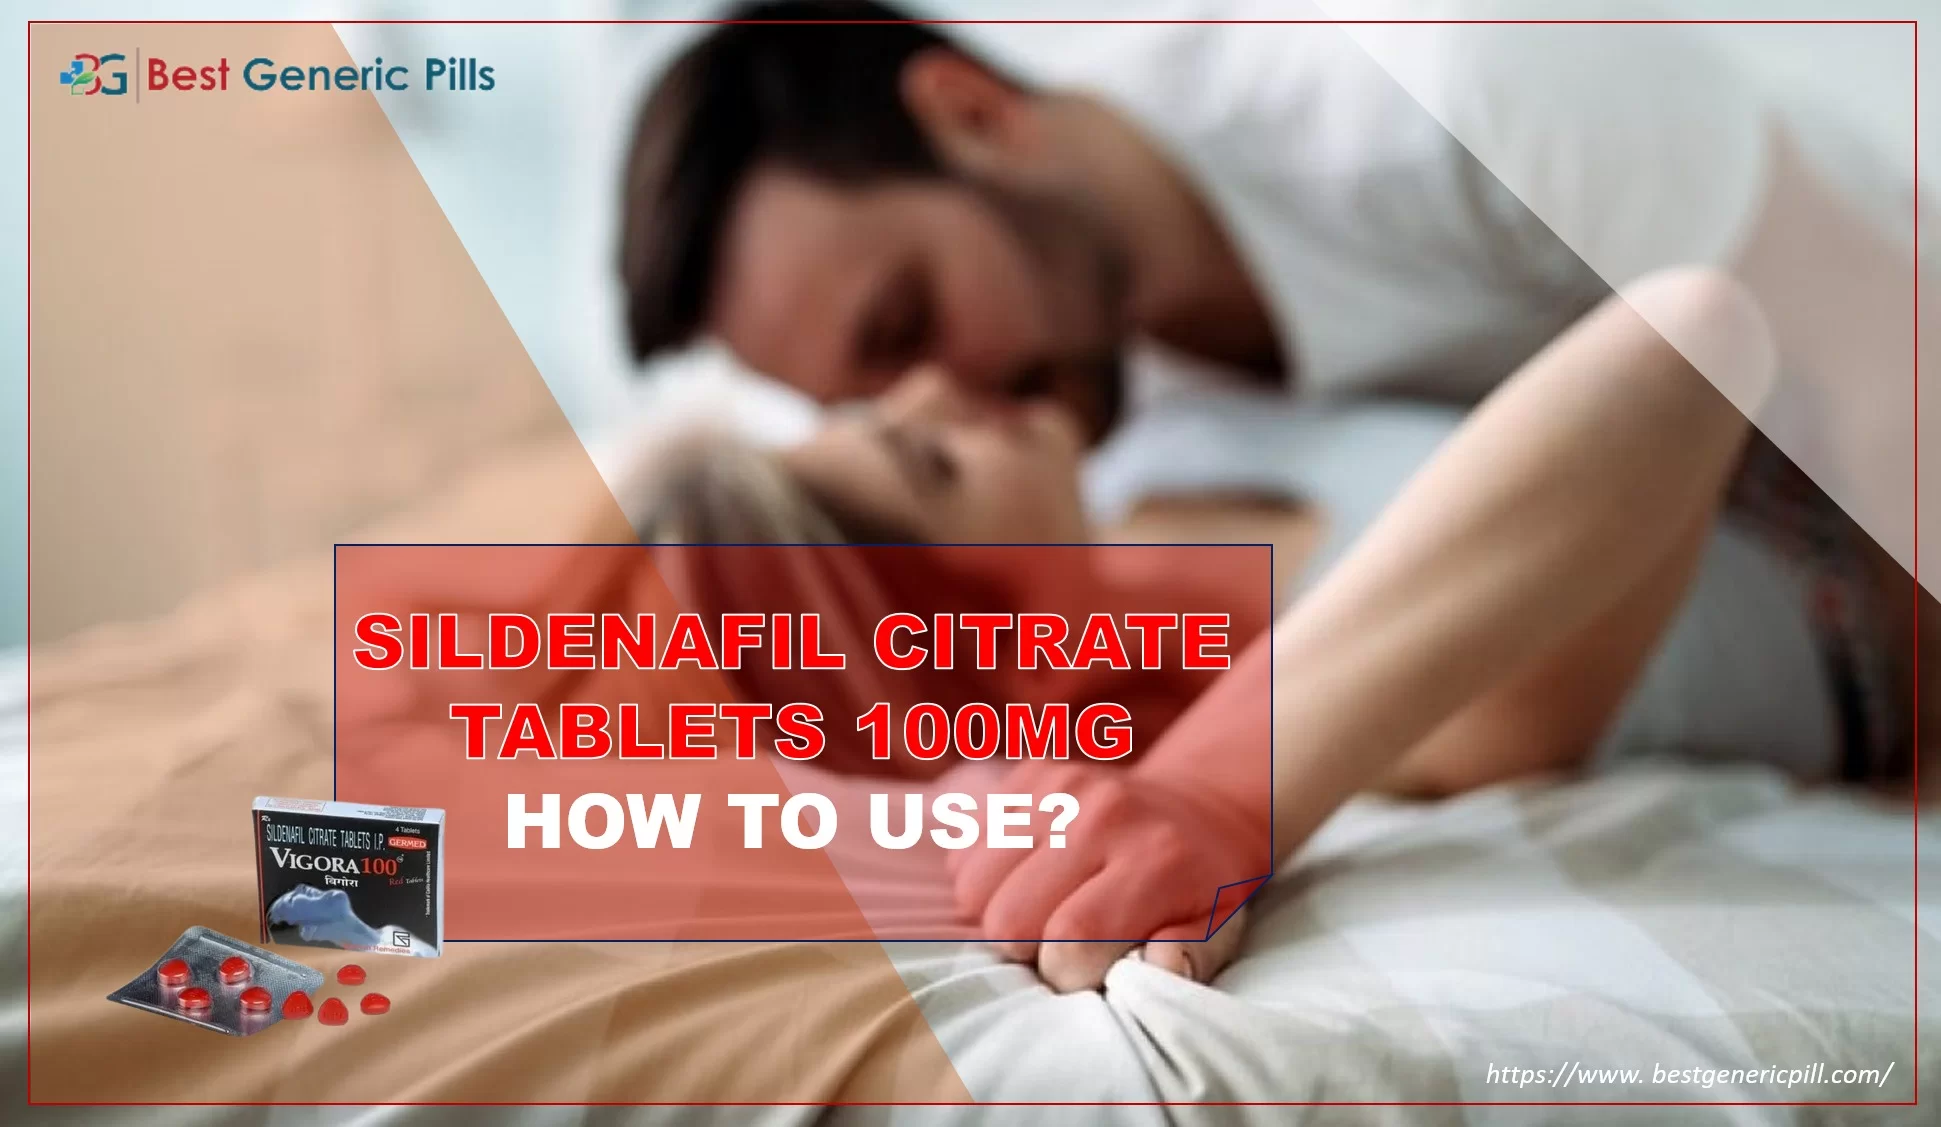 Sildenafil Citrate tablets 100mg how to use